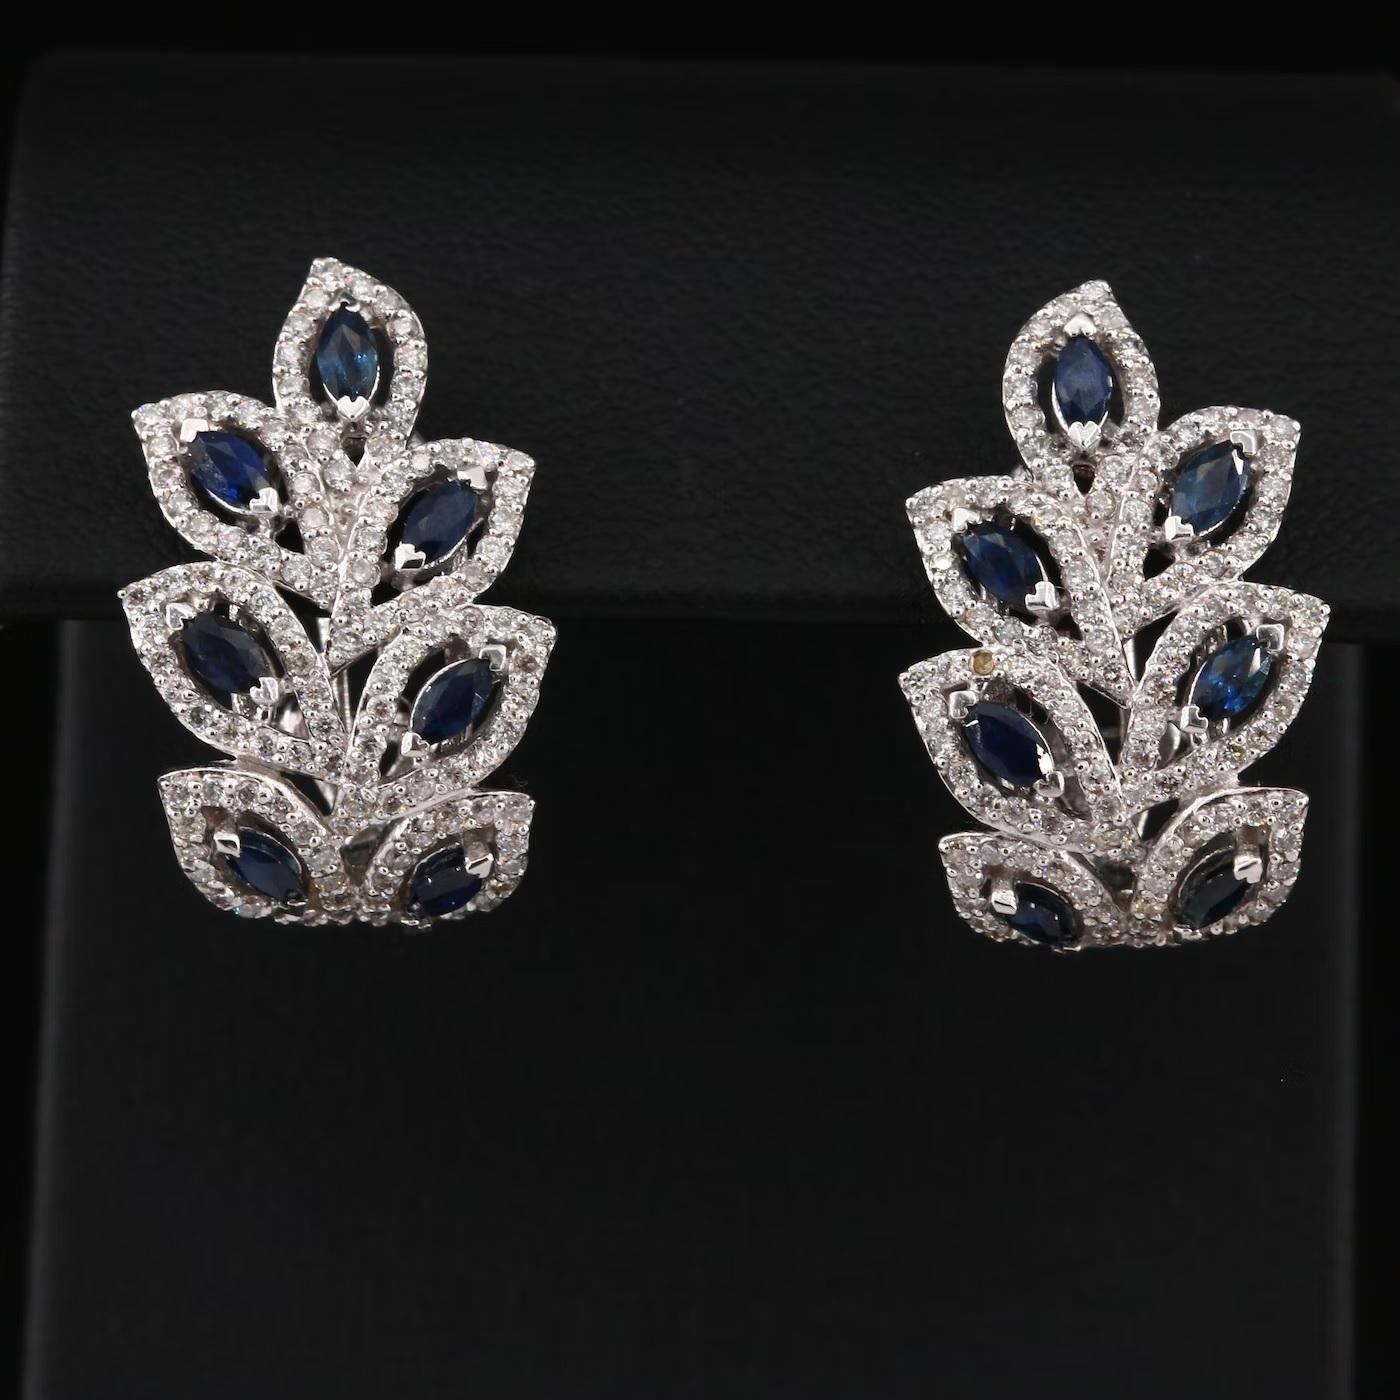 Effy designer Earrings, stamped and hallmarked EFFY 

Limited Edition EFFY ROYALE Bleu collection

NEW with Tags, Tag price $6750

2.74 CWT Natural Blue Sapphire and Diamond

14K White gold, stamped 14K

Comes with gift box